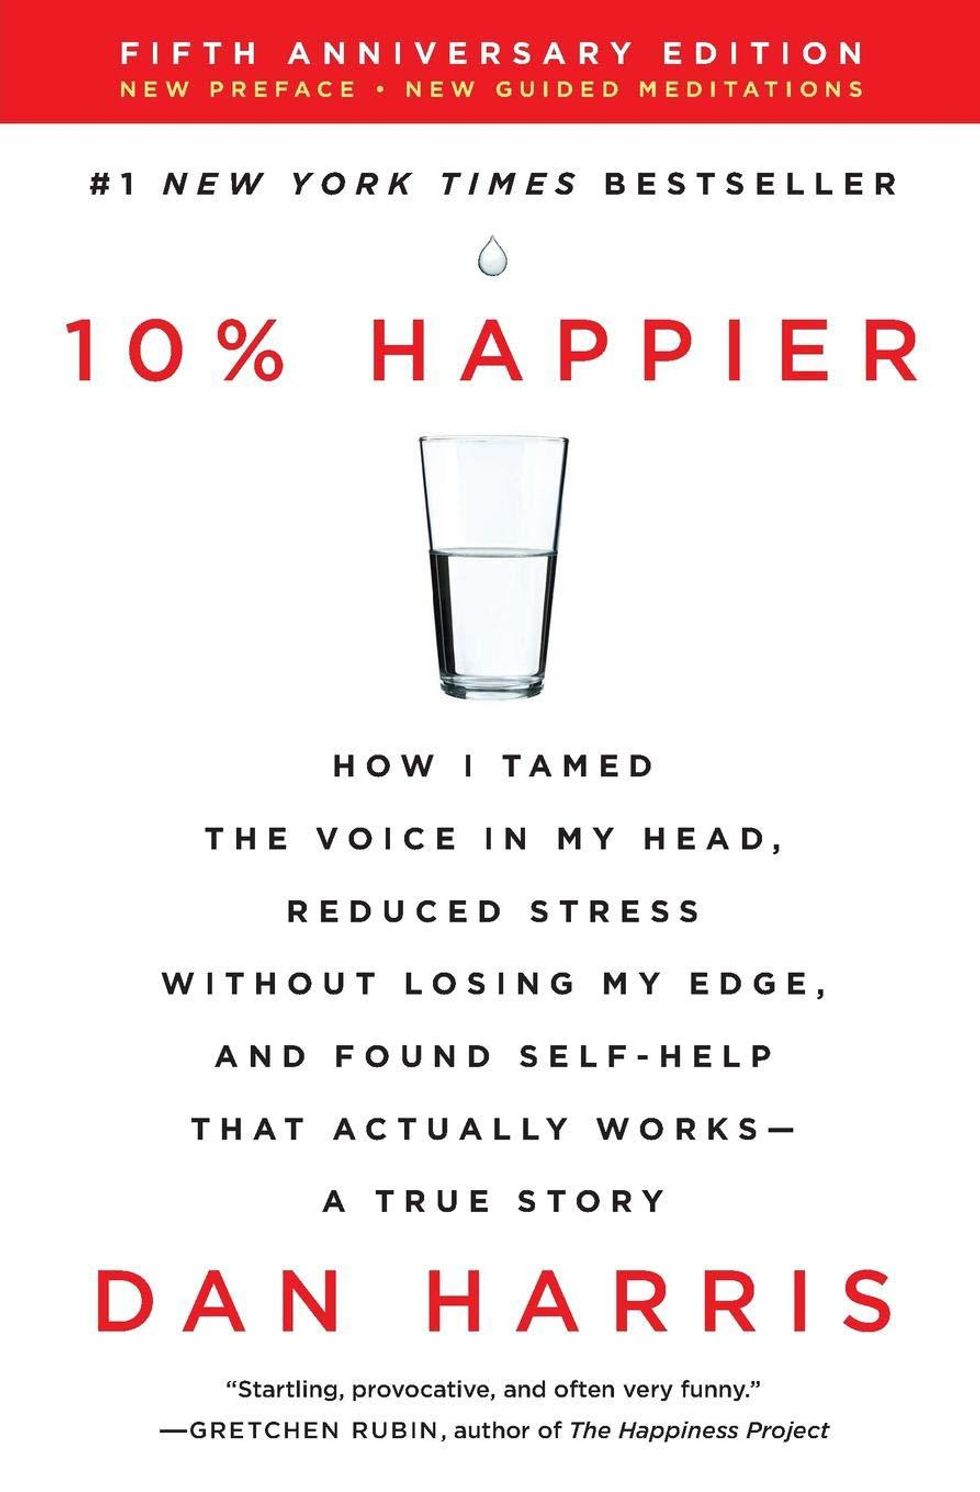 10% Happier Revised Edition: How I Tamed the Voice in My Head, Reduced Stress Without Losing My Edge, and Found Self-Help That Actually Works by Dan Harris